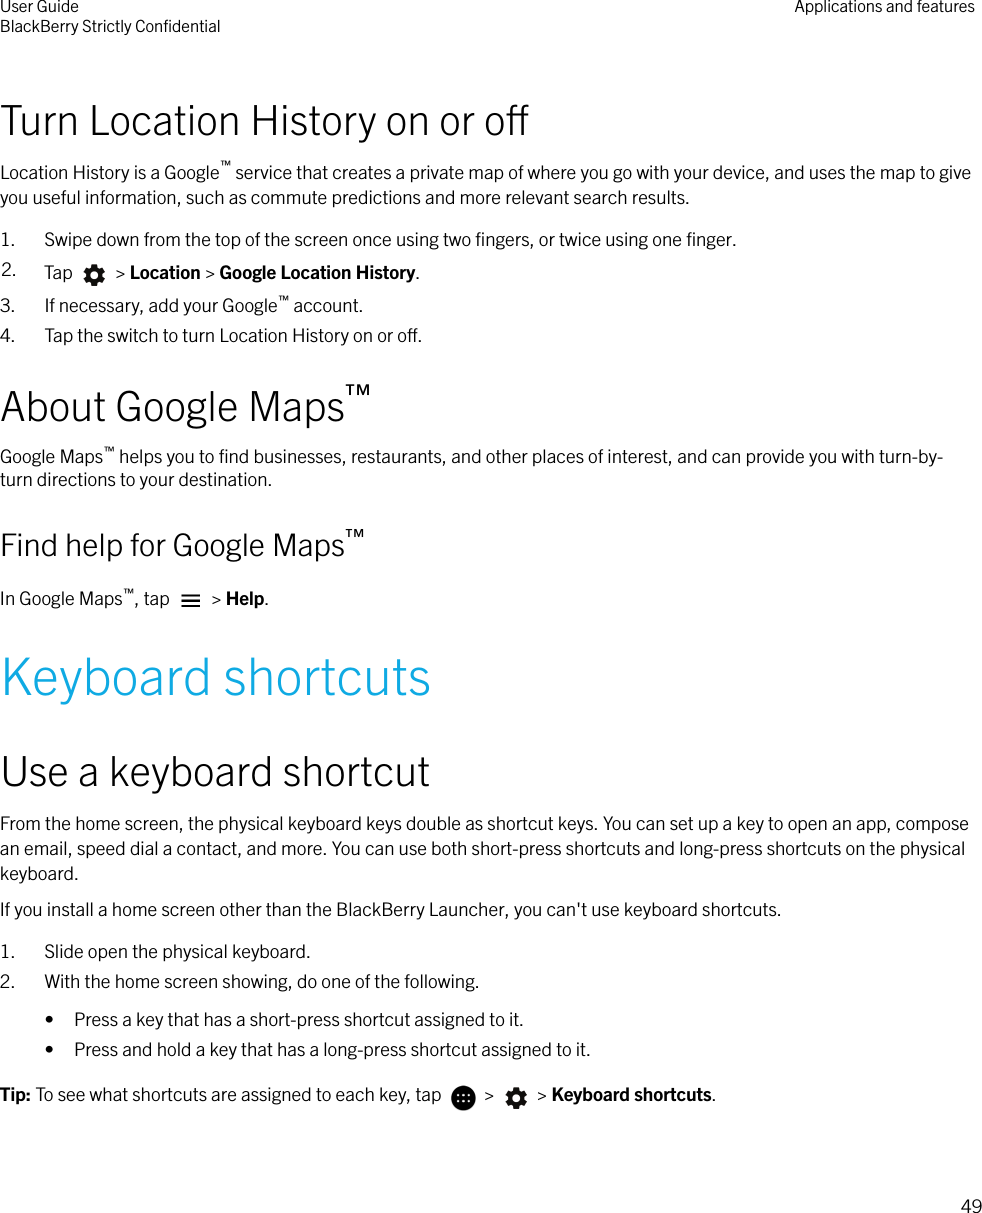 Turn Location History on or oLocation History is a Google™ service that creates a private map of where you go with your device, and uses the map to giveyou useful information, such as commute predictions and more relevant search results.1. Swipe down from the top of the screen once using two ﬁngers, or twice using one ﬁnger.2. Tap   &gt; Location &gt; Google Location History.3. If necessary, add your Google™ account.4. Tap the switch to turn Location History on or o.About Google Maps™Google Maps™ helps you to ﬁnd businesses, restaurants, and other places of interest, and can provide you with turn-by-turn directions to your destination.Find help for Google Maps™In Google Maps™, tap   &gt; Help.Keyboard shortcutsUse a keyboard shortcutFrom the home screen, the physical keyboard keys double as shortcut keys. You can set up a key to open an app, composean email, speed dial a contact, and more. You can use both short-press shortcuts and long-press shortcuts on the physicalkeyboard.If you install a home screen other than the BlackBerry Launcher, you can&apos;t use keyboard shortcuts.1. Slide open the physical keyboard.2. With the home screen showing, do one of the following.• Press a key that has a short-press shortcut assigned to it.• Press and hold a key that has a long-press shortcut assigned to it.Tip: To see what shortcuts are assigned to each key, tap   &gt;   &gt; Keyboard shortcuts.User GuideBlackBerry Strictly ConﬁdentialApplications and features49